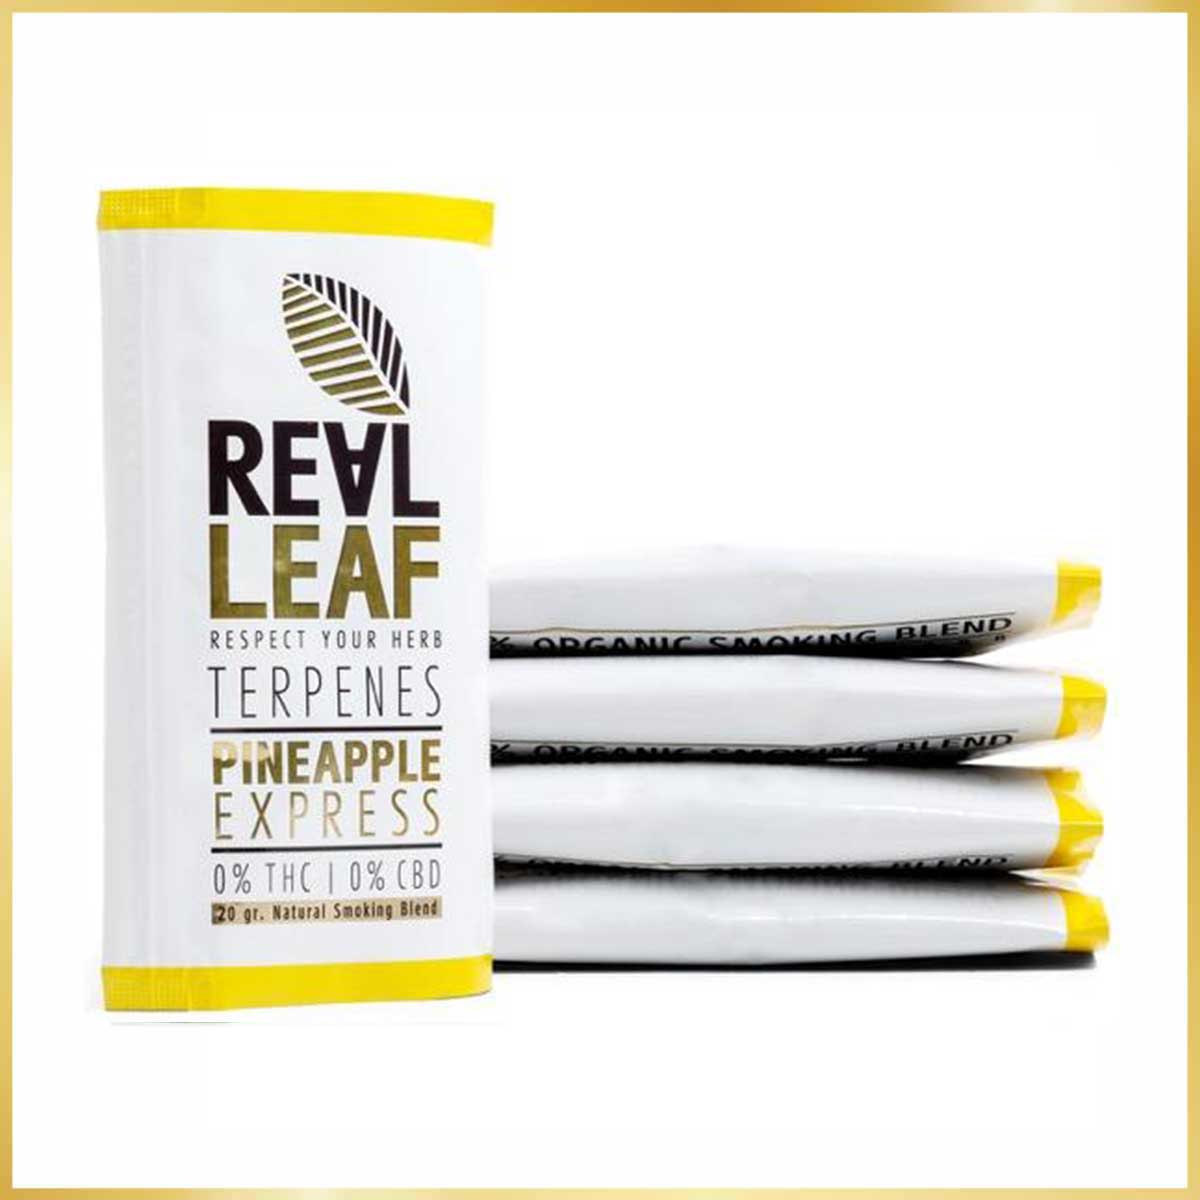 Substitut de Tabac Pineapple Express - Real Leaf, Acheter